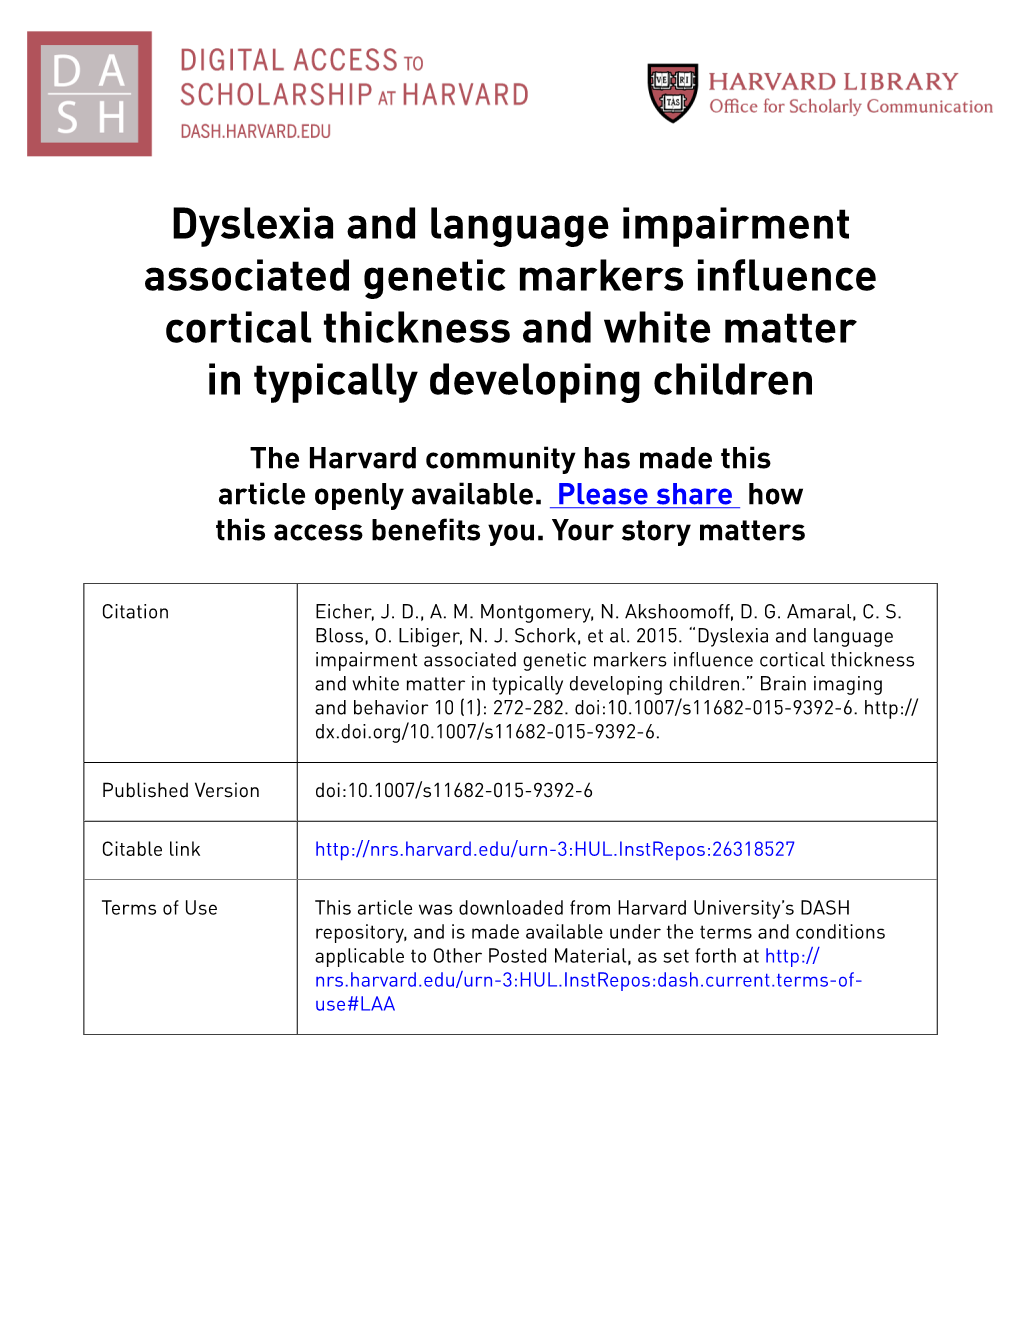 Dyslexia and Language Impairment Associated Genetic Markers Influence Cortical Thickness and White Matter in Typically Developing Children